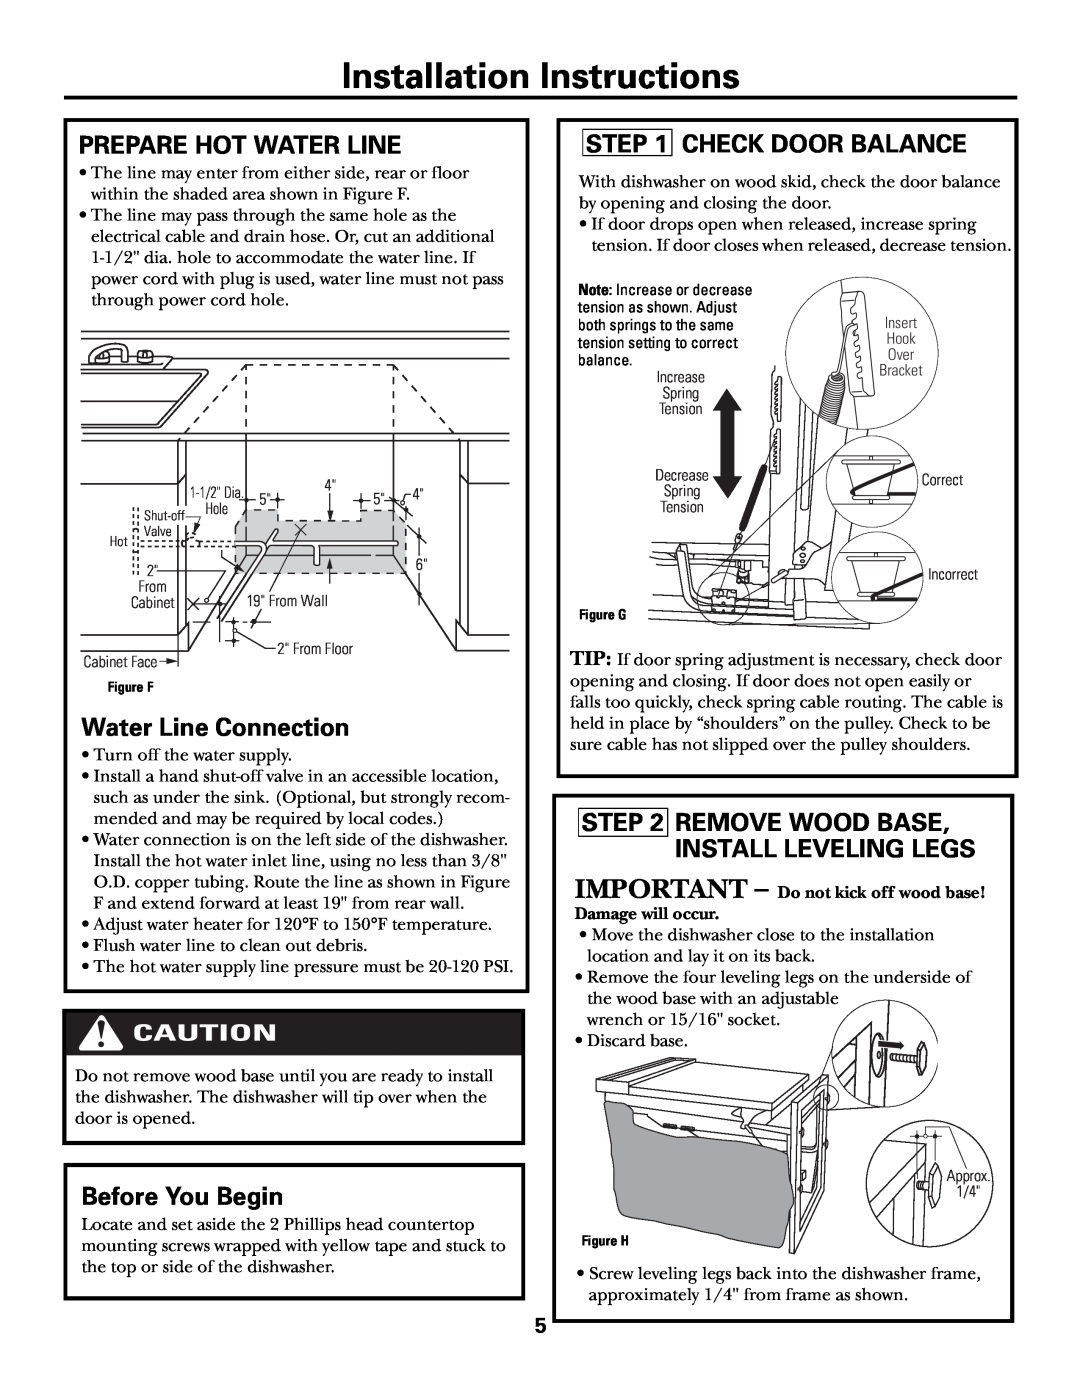 GE GHDA980 Installation Instructions, Prepare Hot Water Line, Check Door Balance, Water Line Connection, Before You Begin 